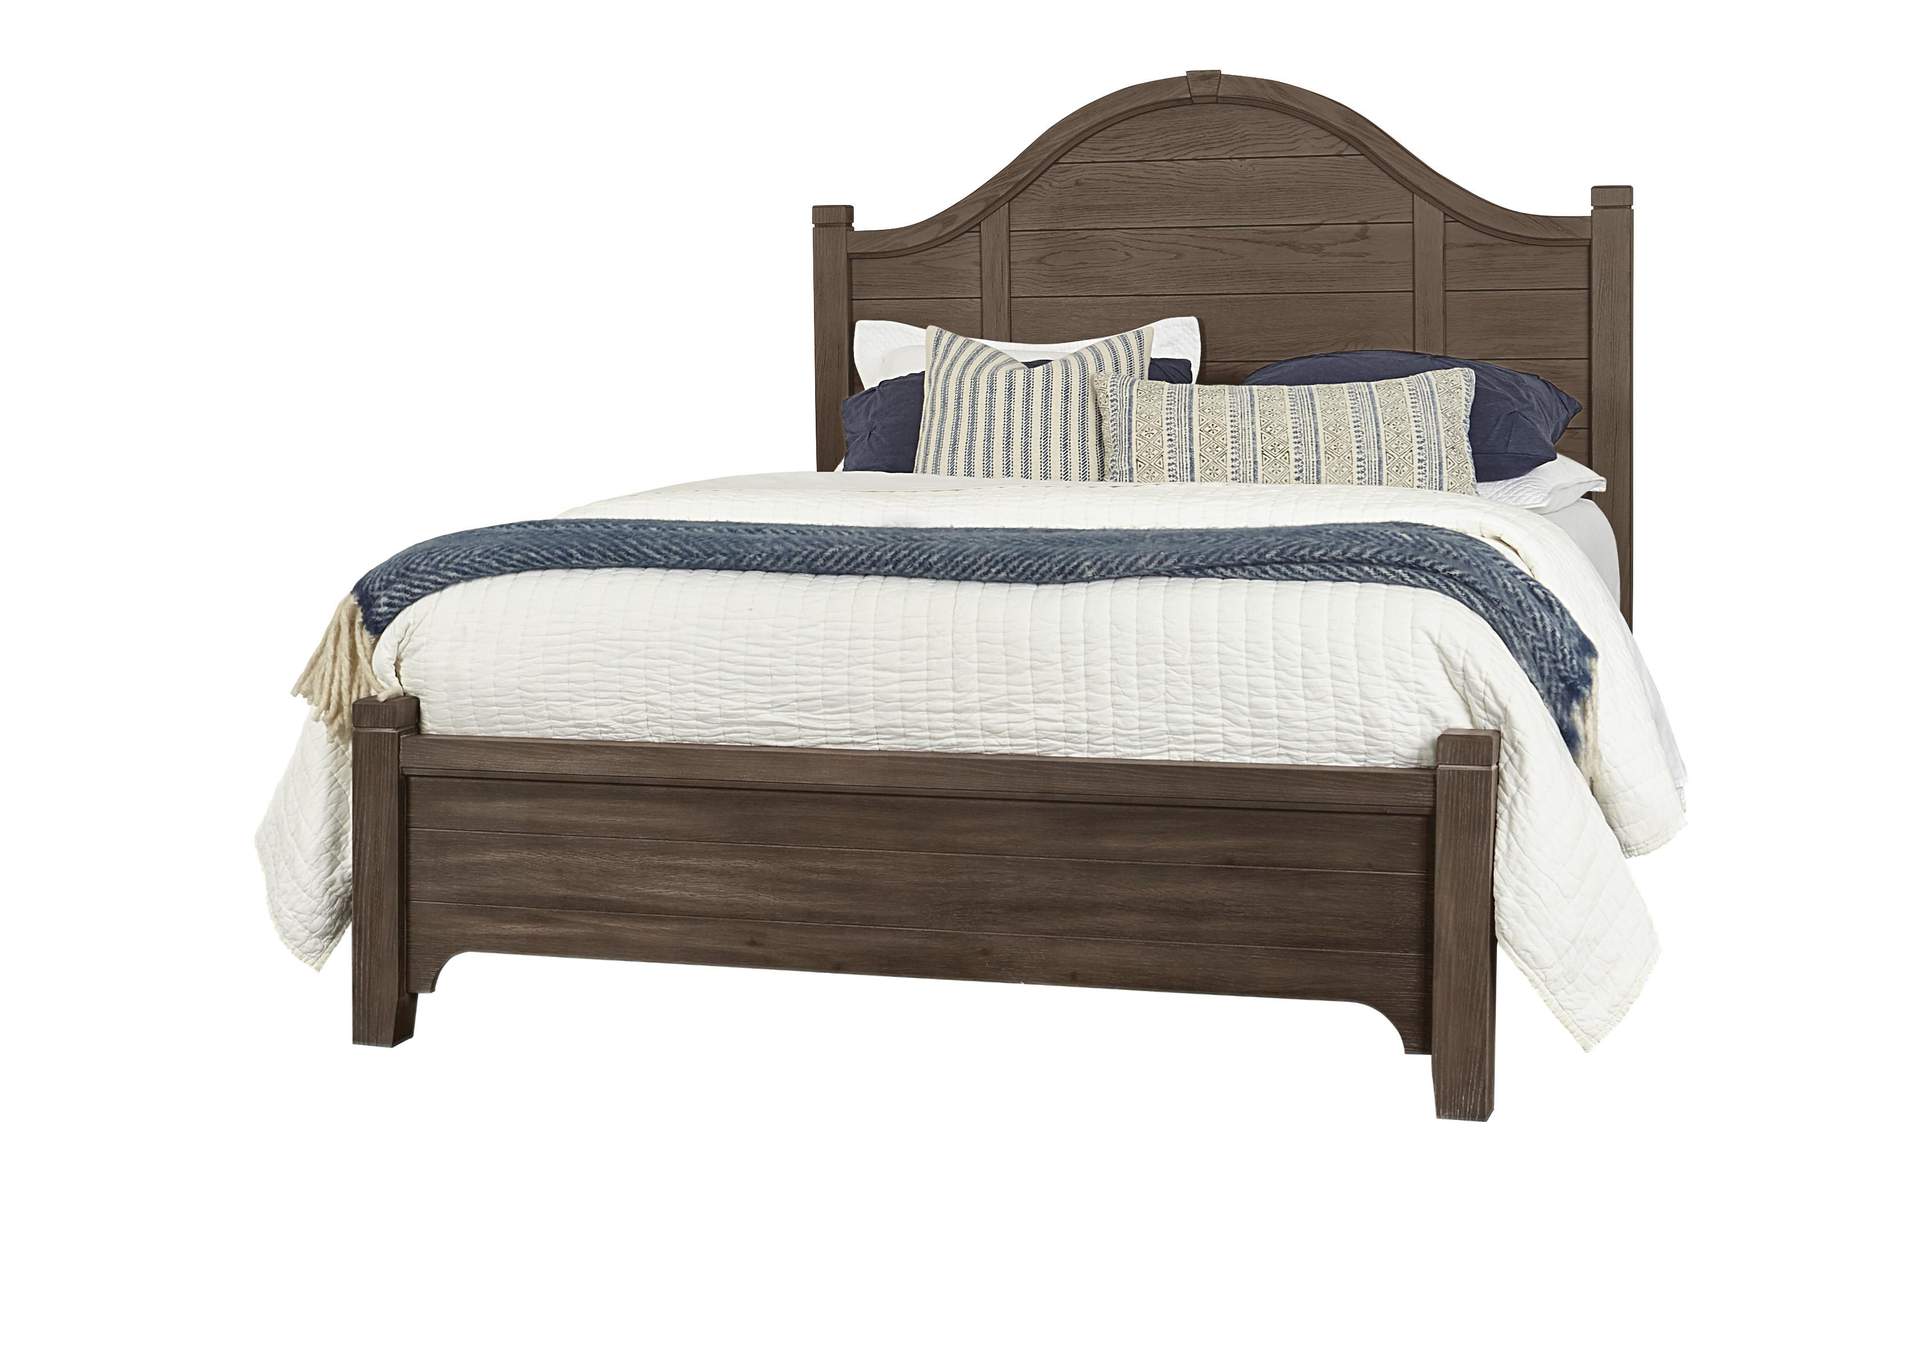 Bungalow Folkstone  Queen Arched Bed,Vaughan-Bassett